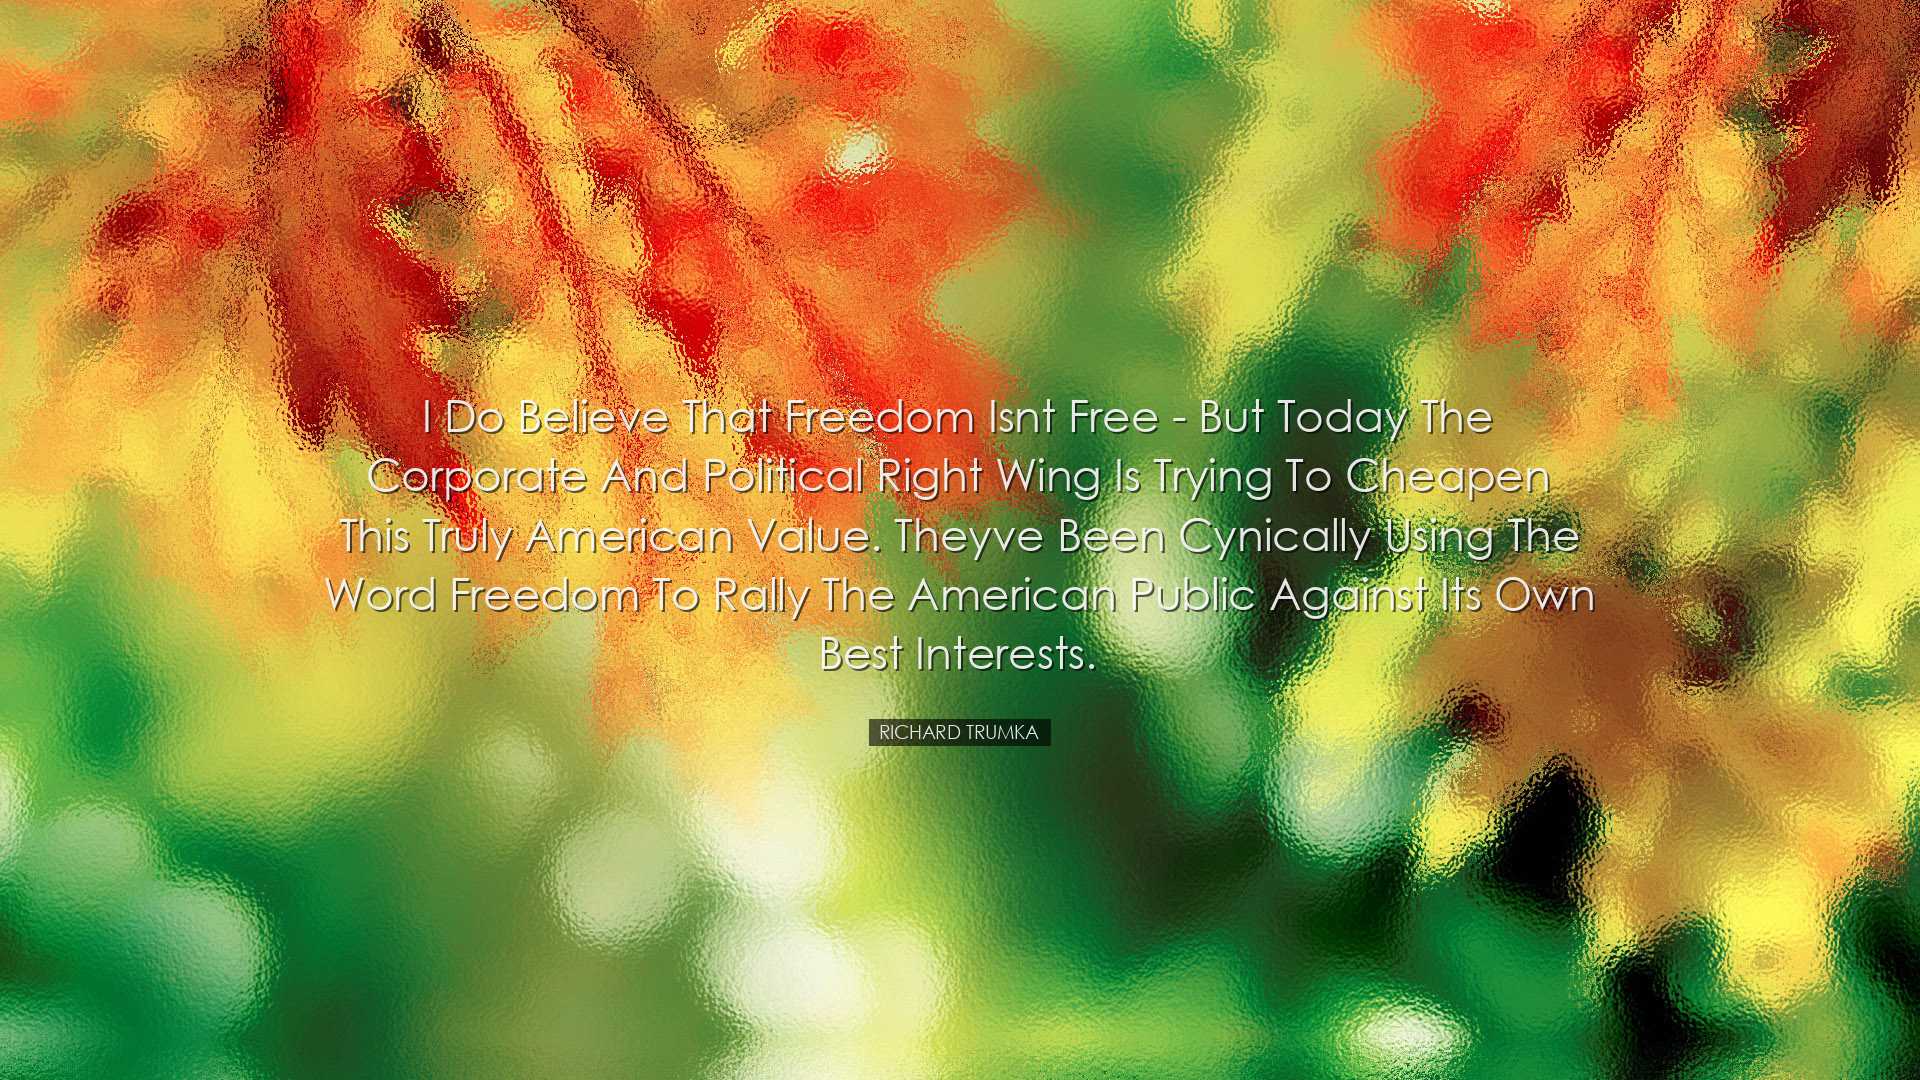 I do believe that freedom isnt free - but today the corporate and